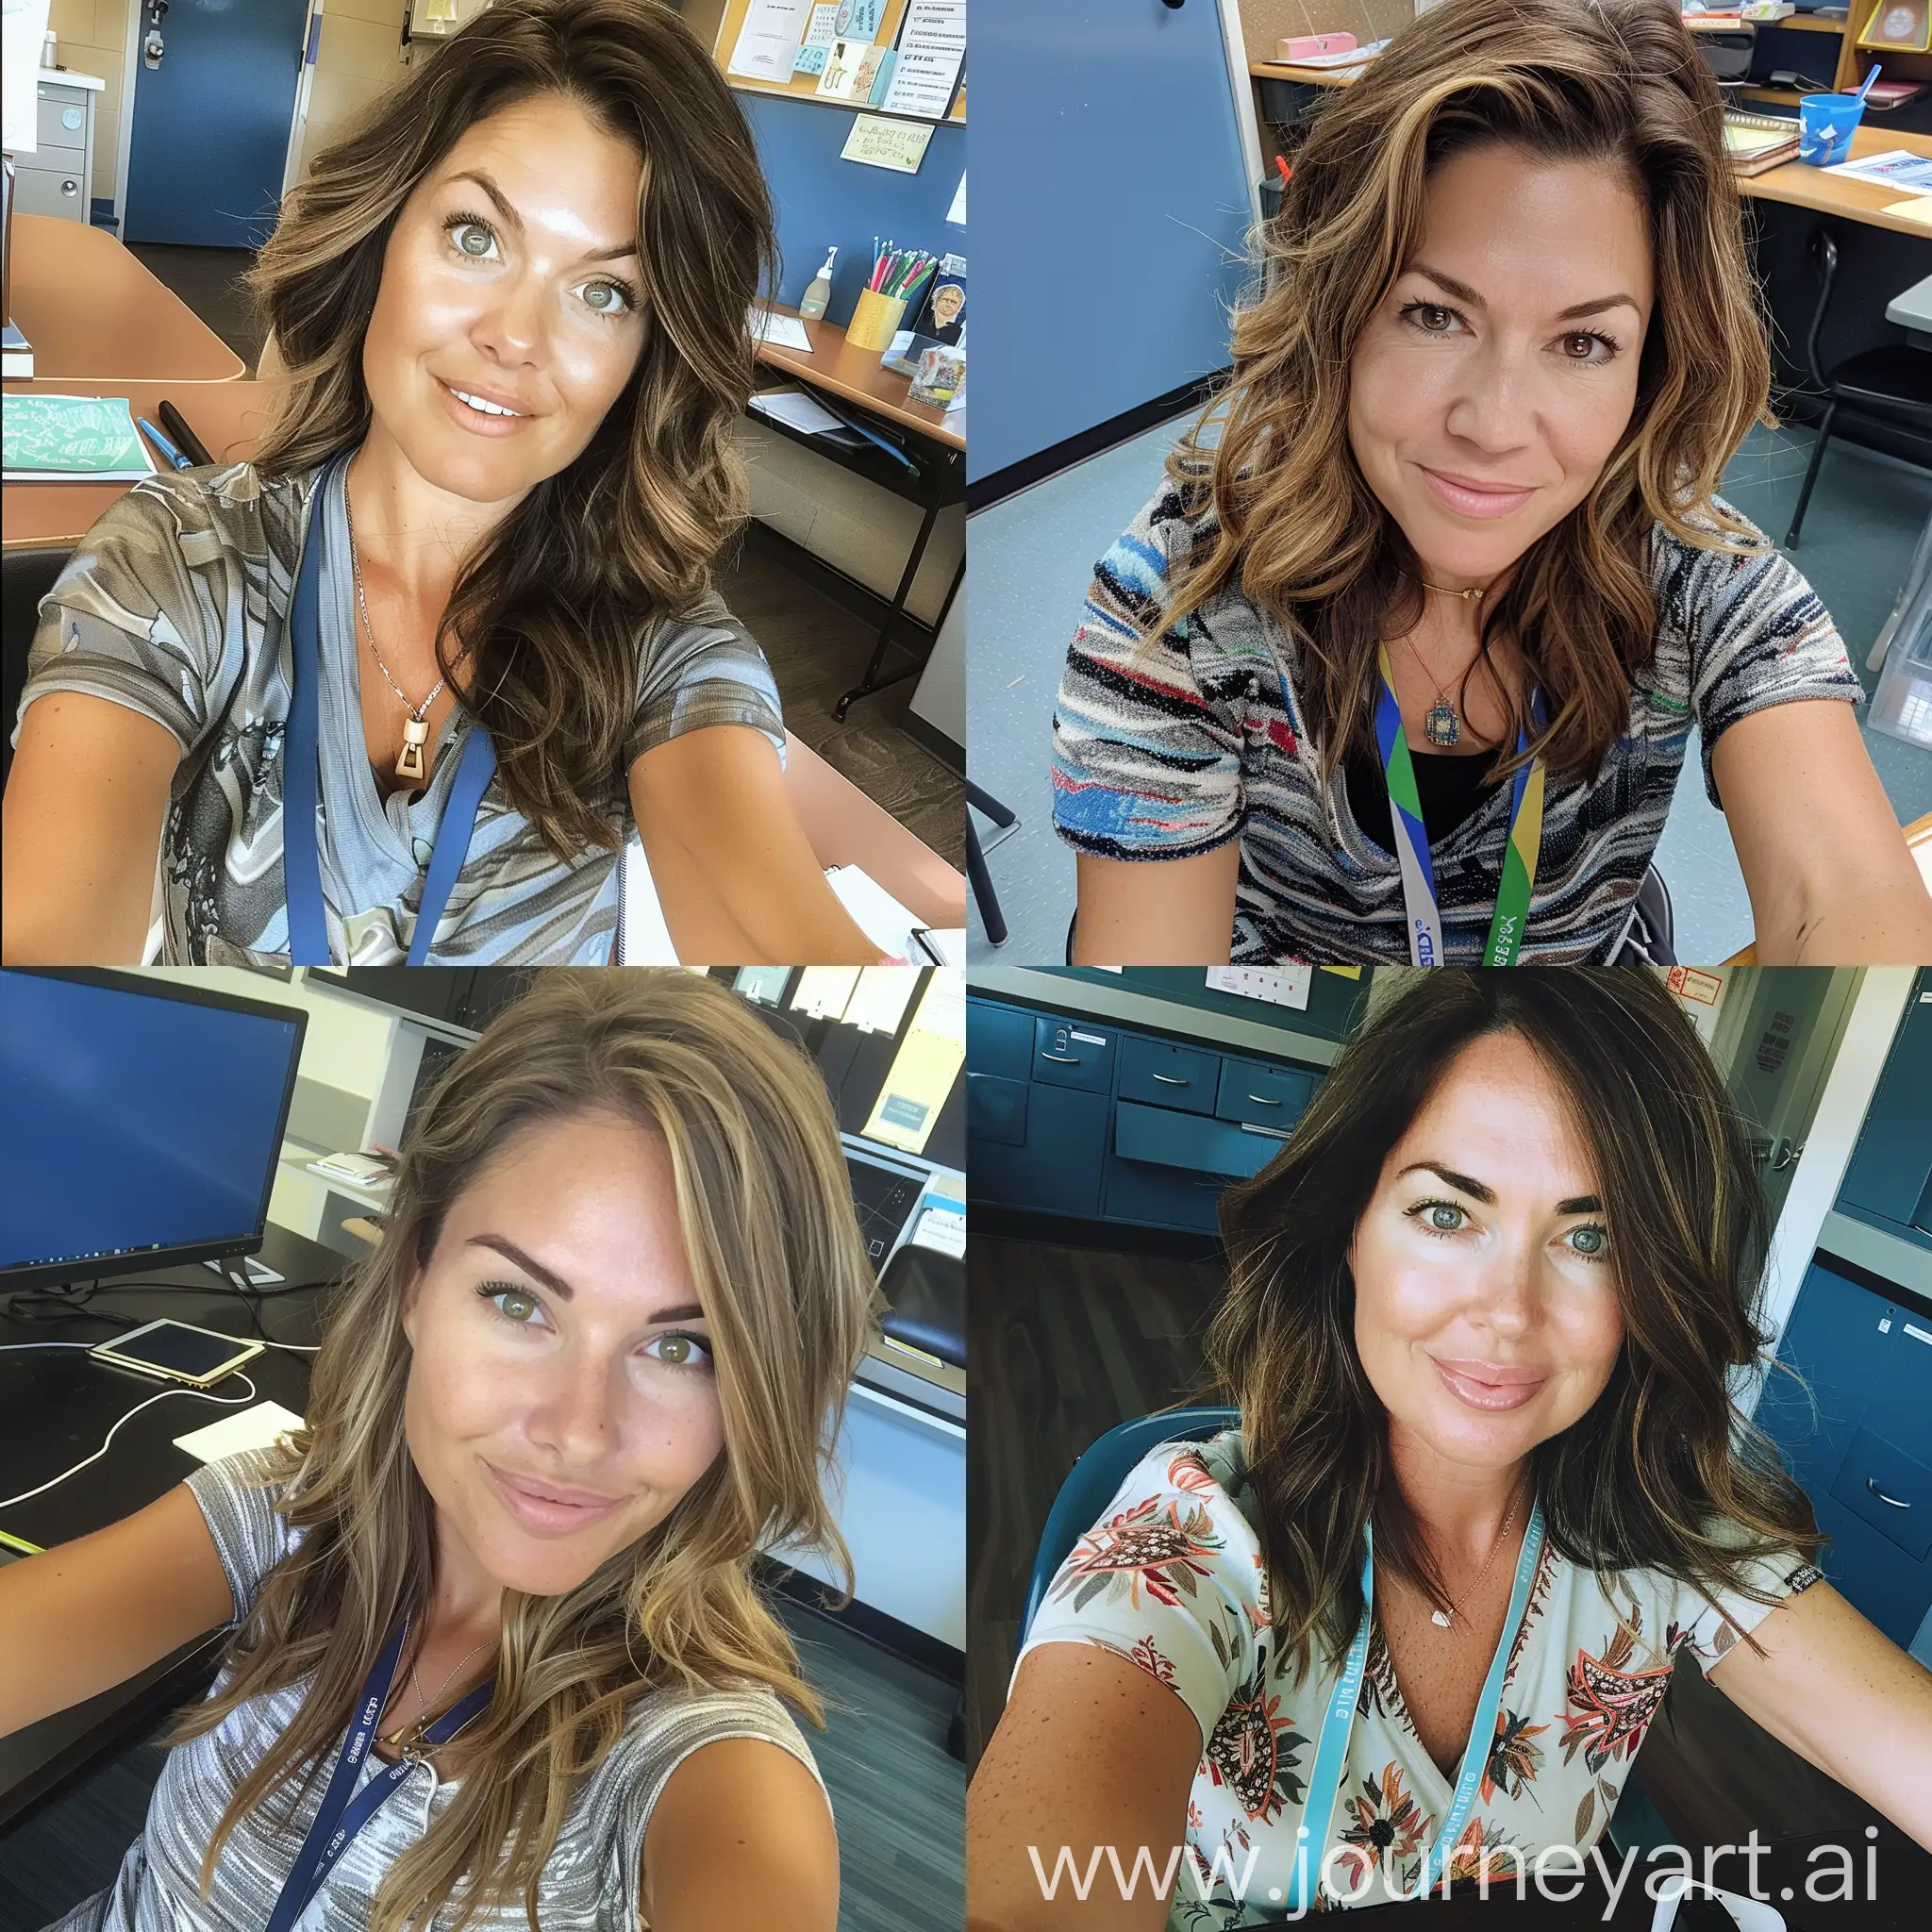 Elementary-School-Teacher-Taking-Selfie-at-Desk-with-Casual-Attire-and-Lanyard